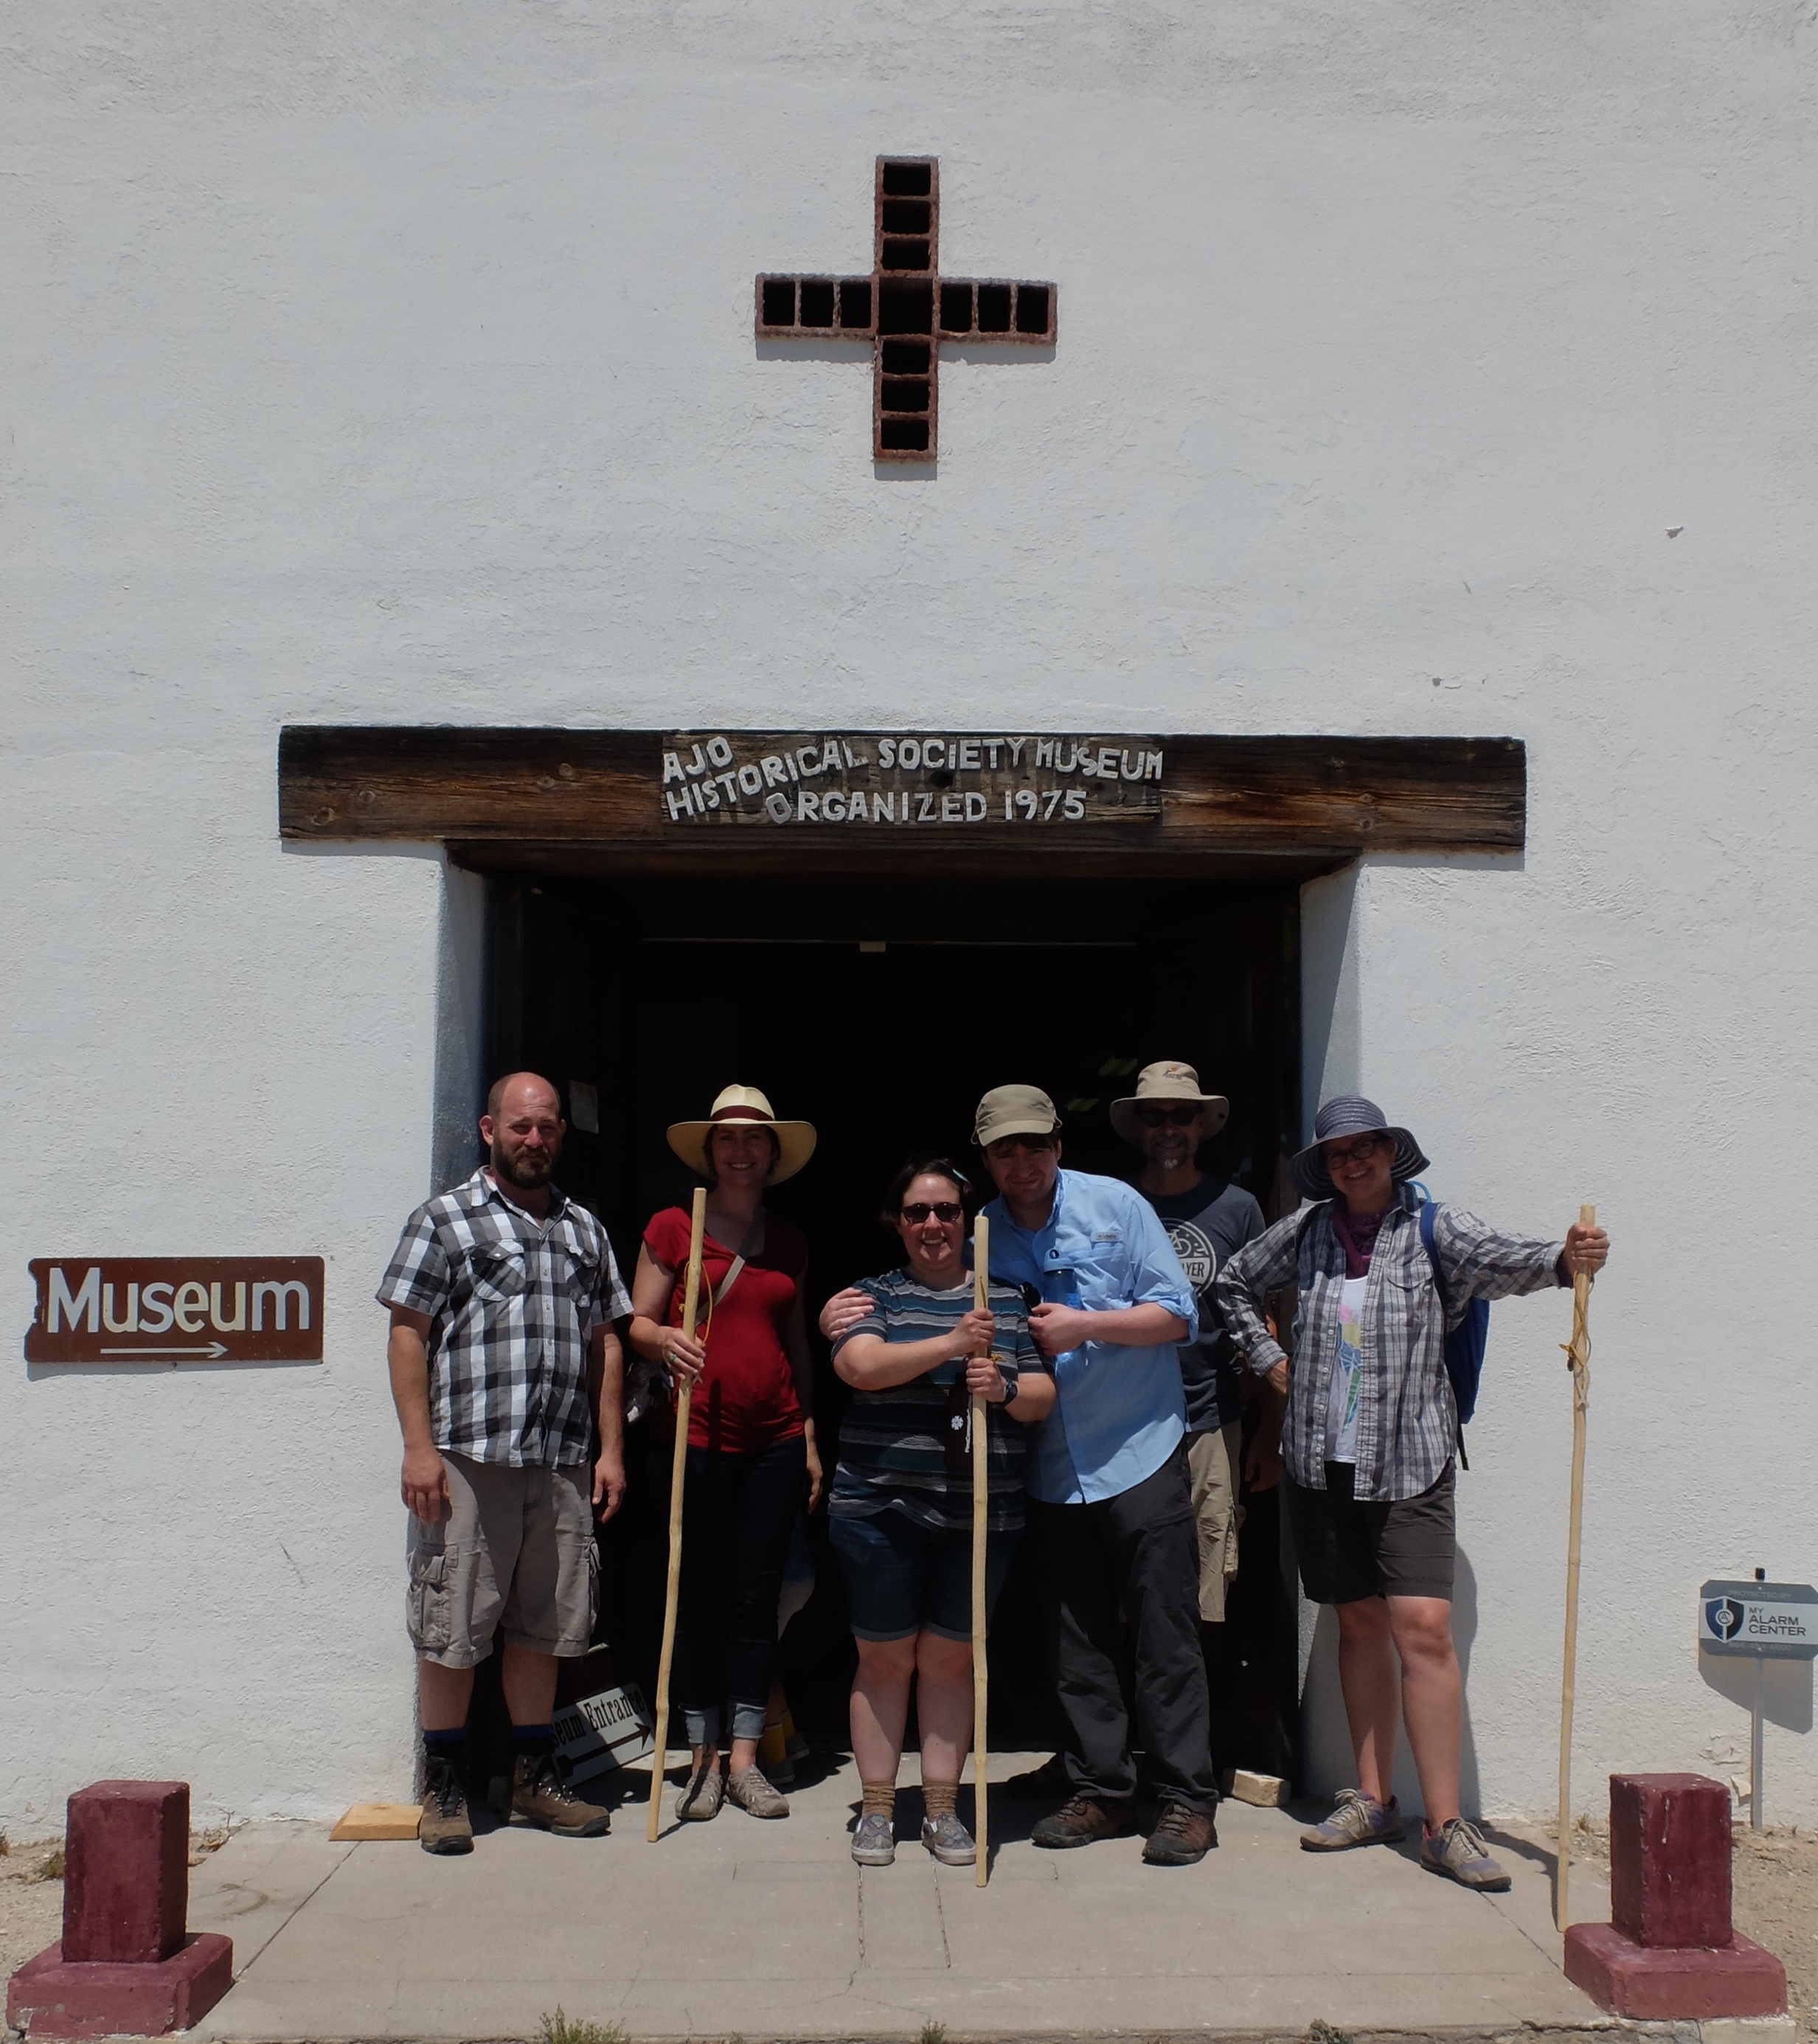 A group from the University of Arizona exploring Ajo's Historical Society Museum